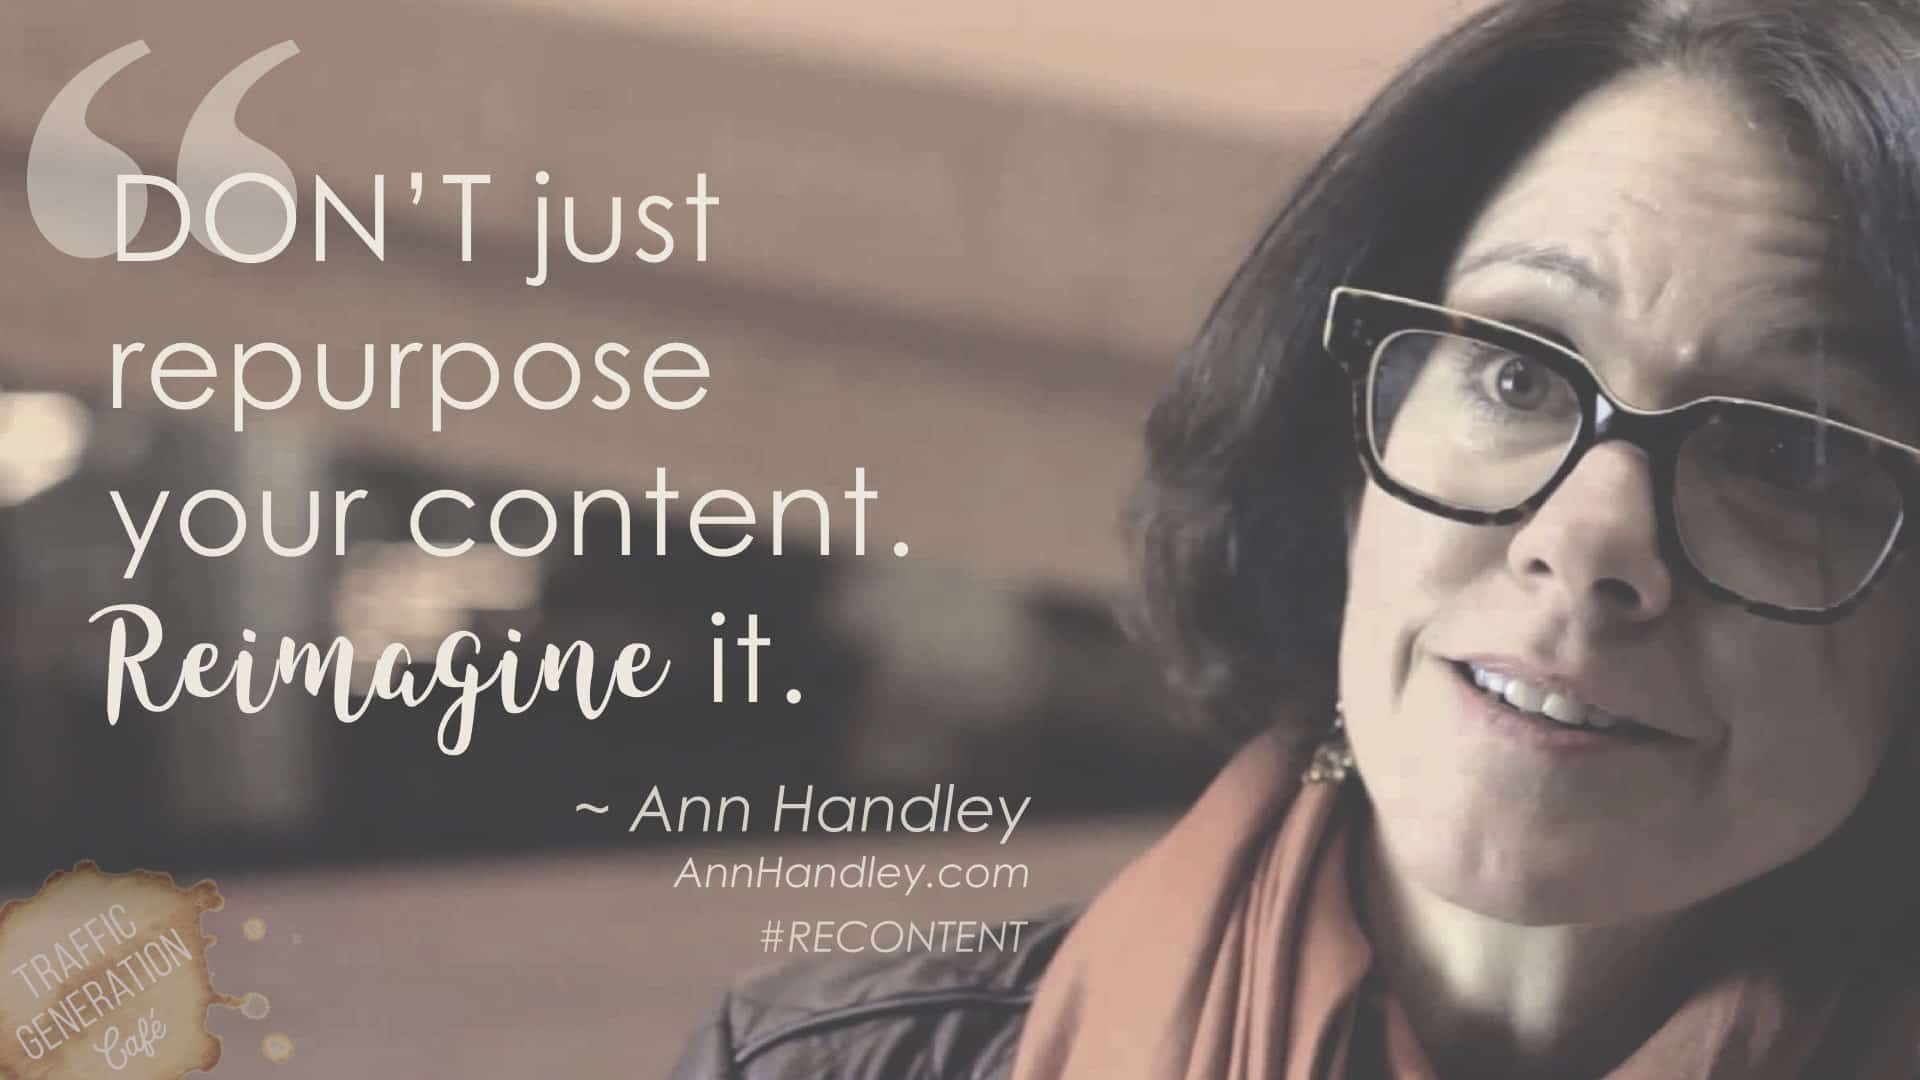 Best content repurposing advice by Ann Handley on Traffic Generation Cafe